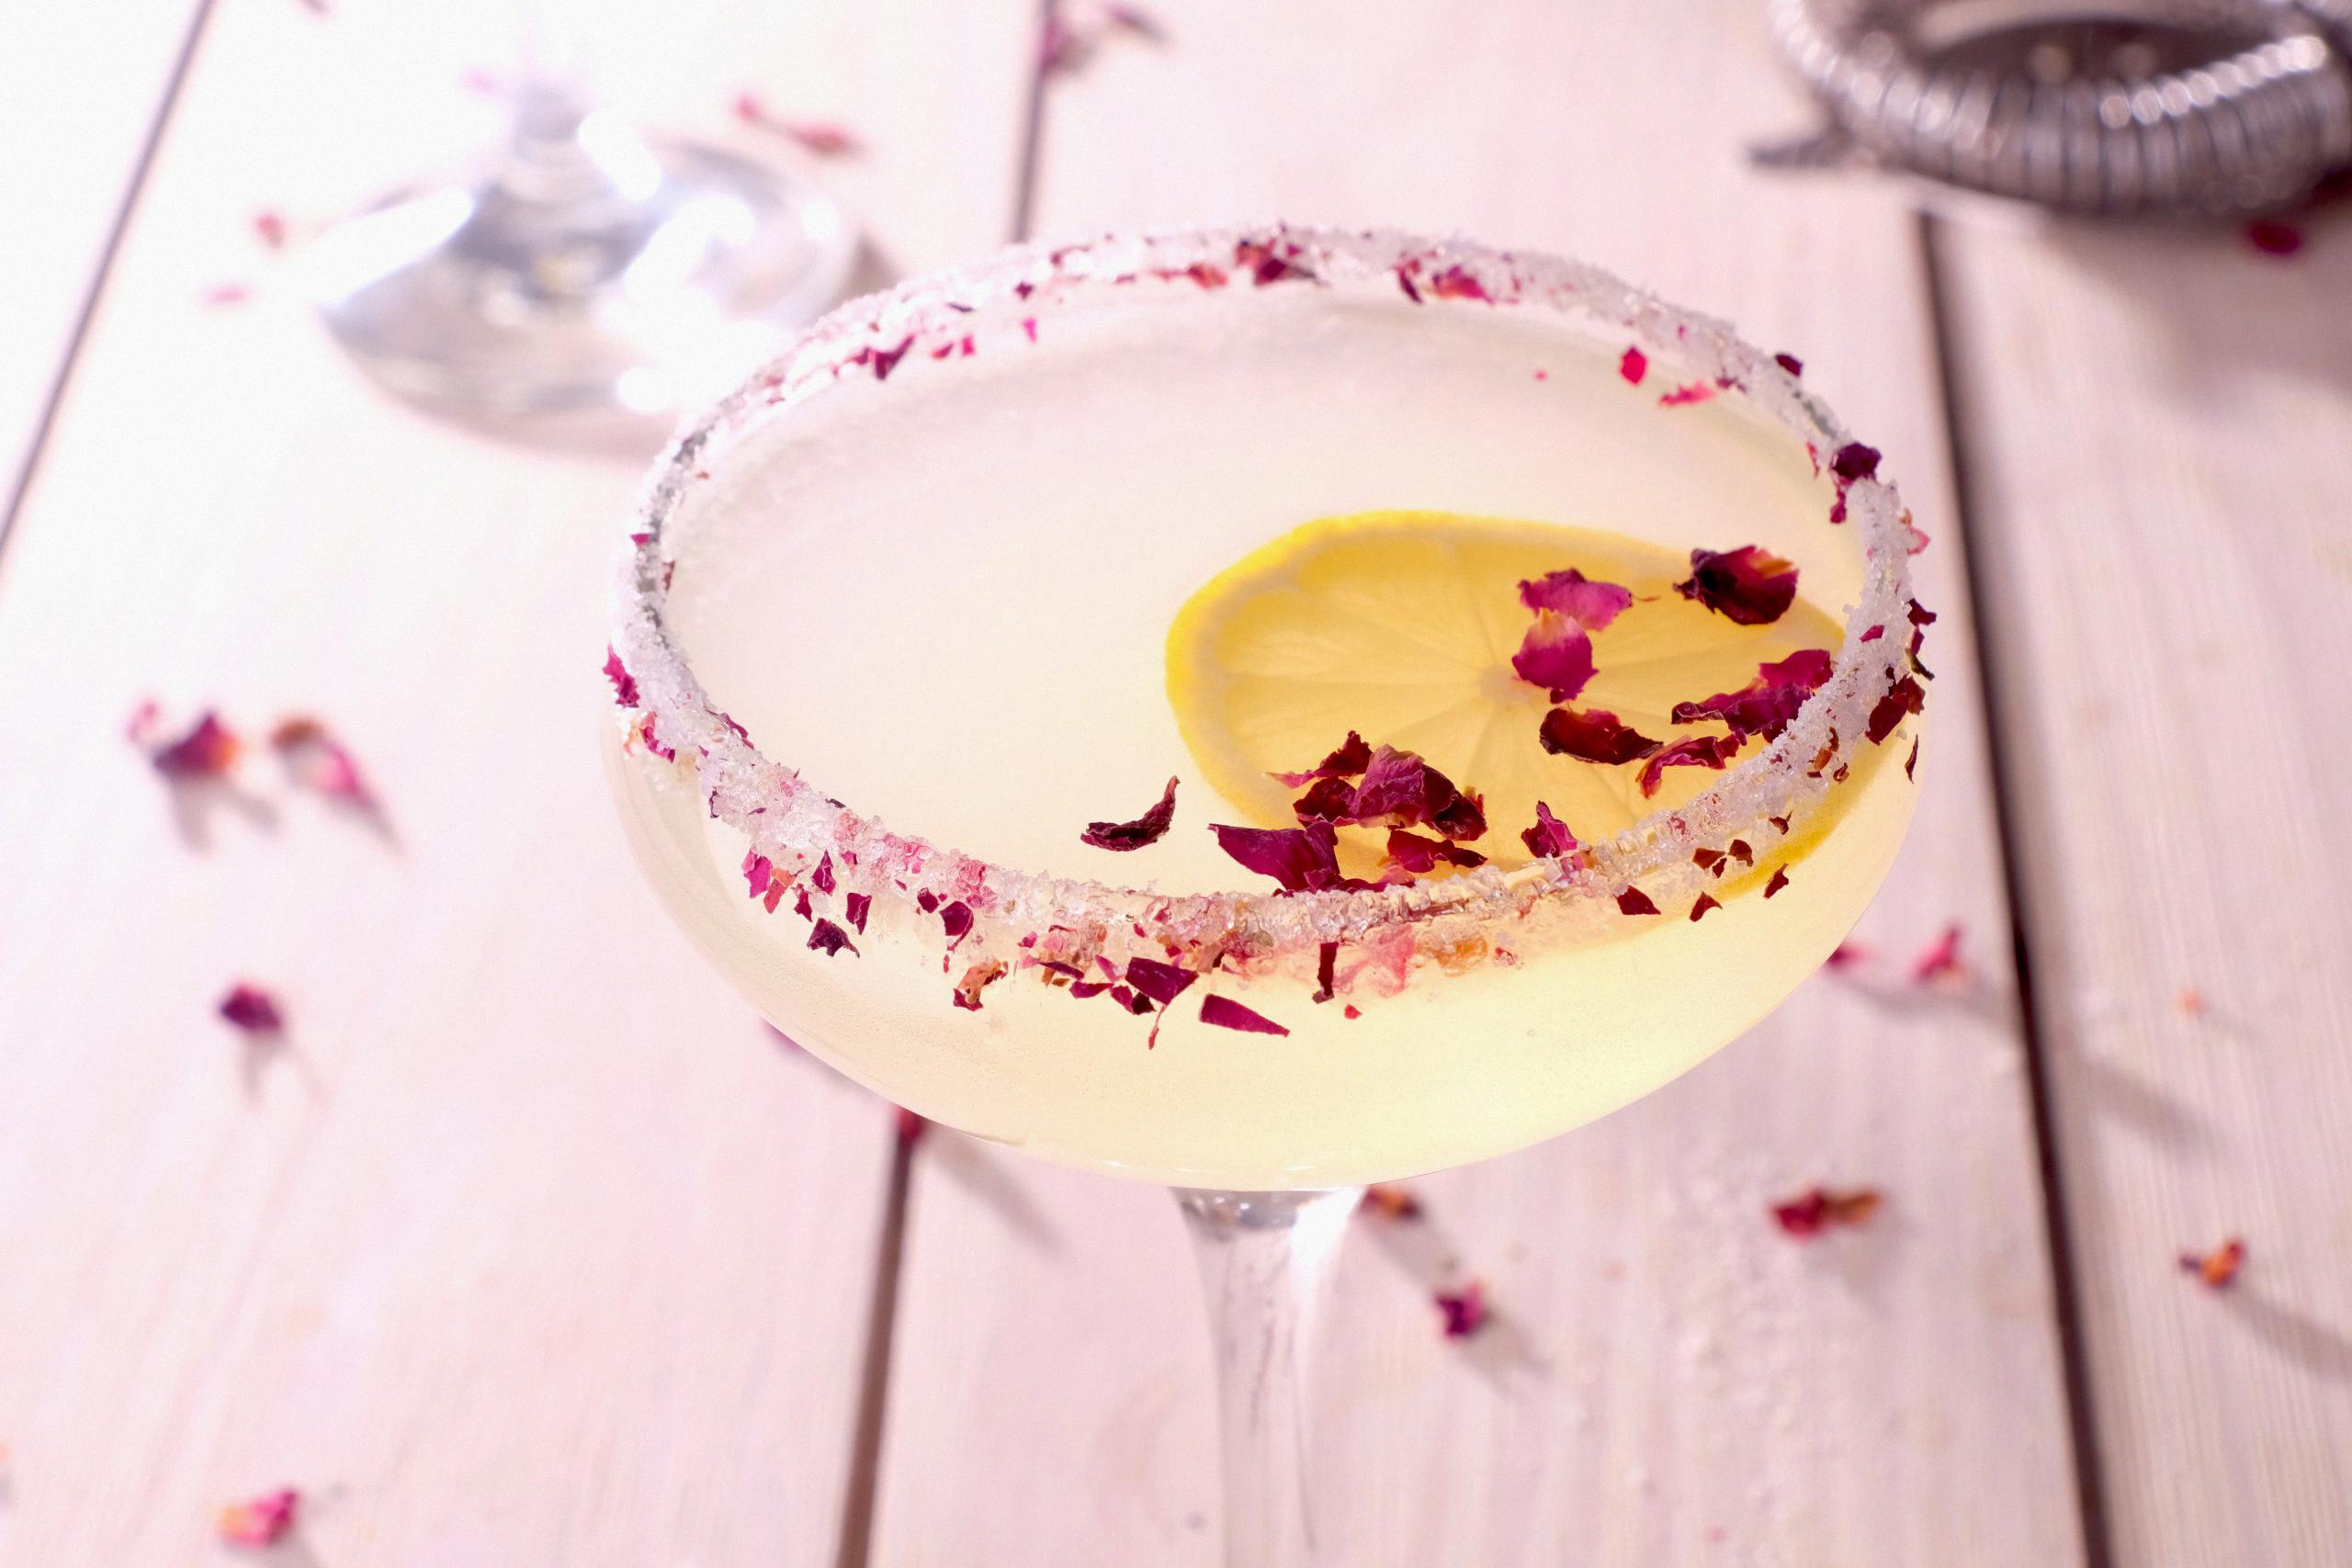 rose water cocktails